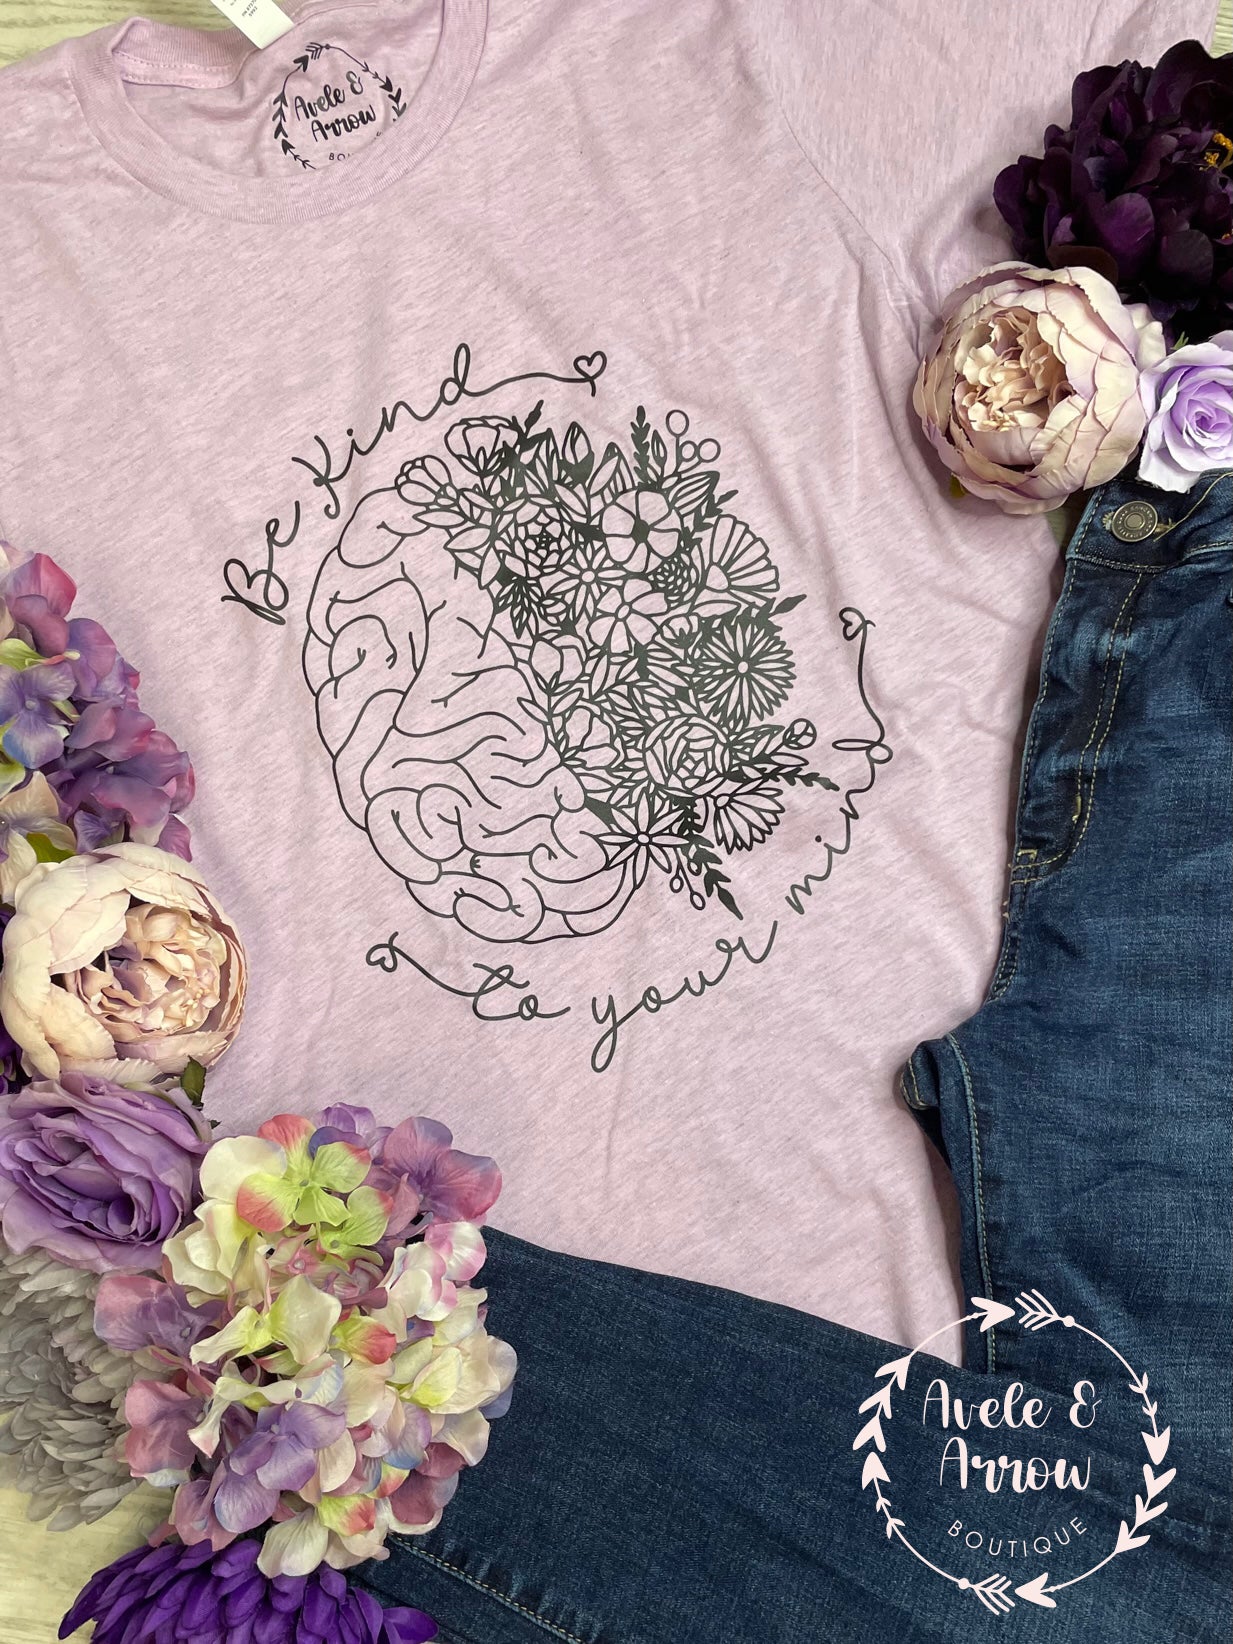 Be Kind To Your Mind Graphic Tee